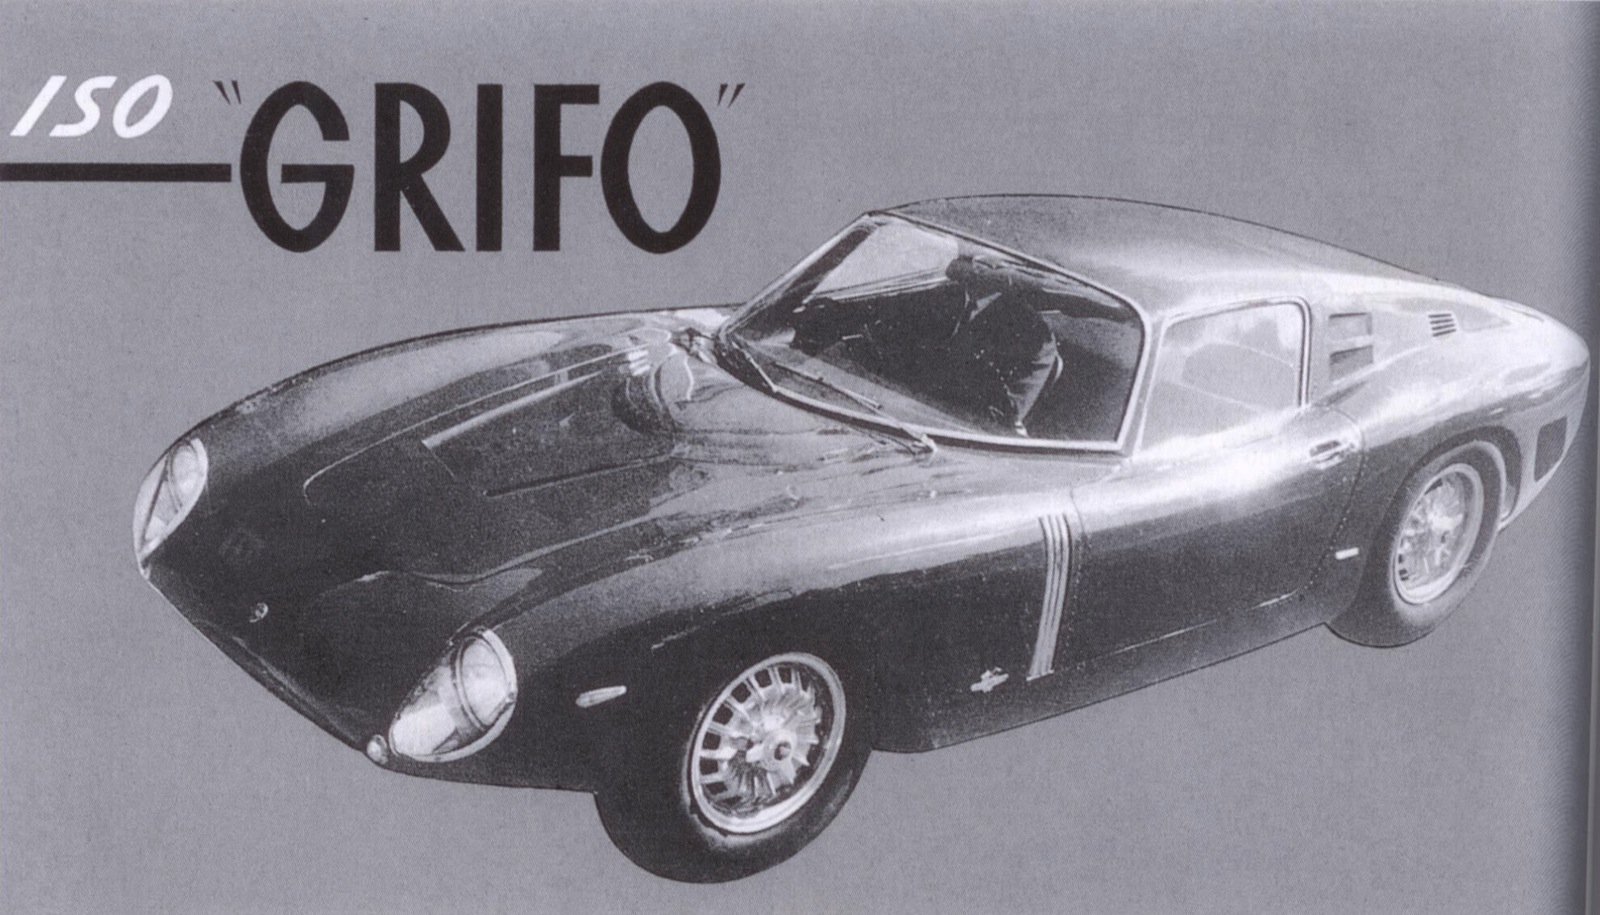 The Iso Grifo Legend